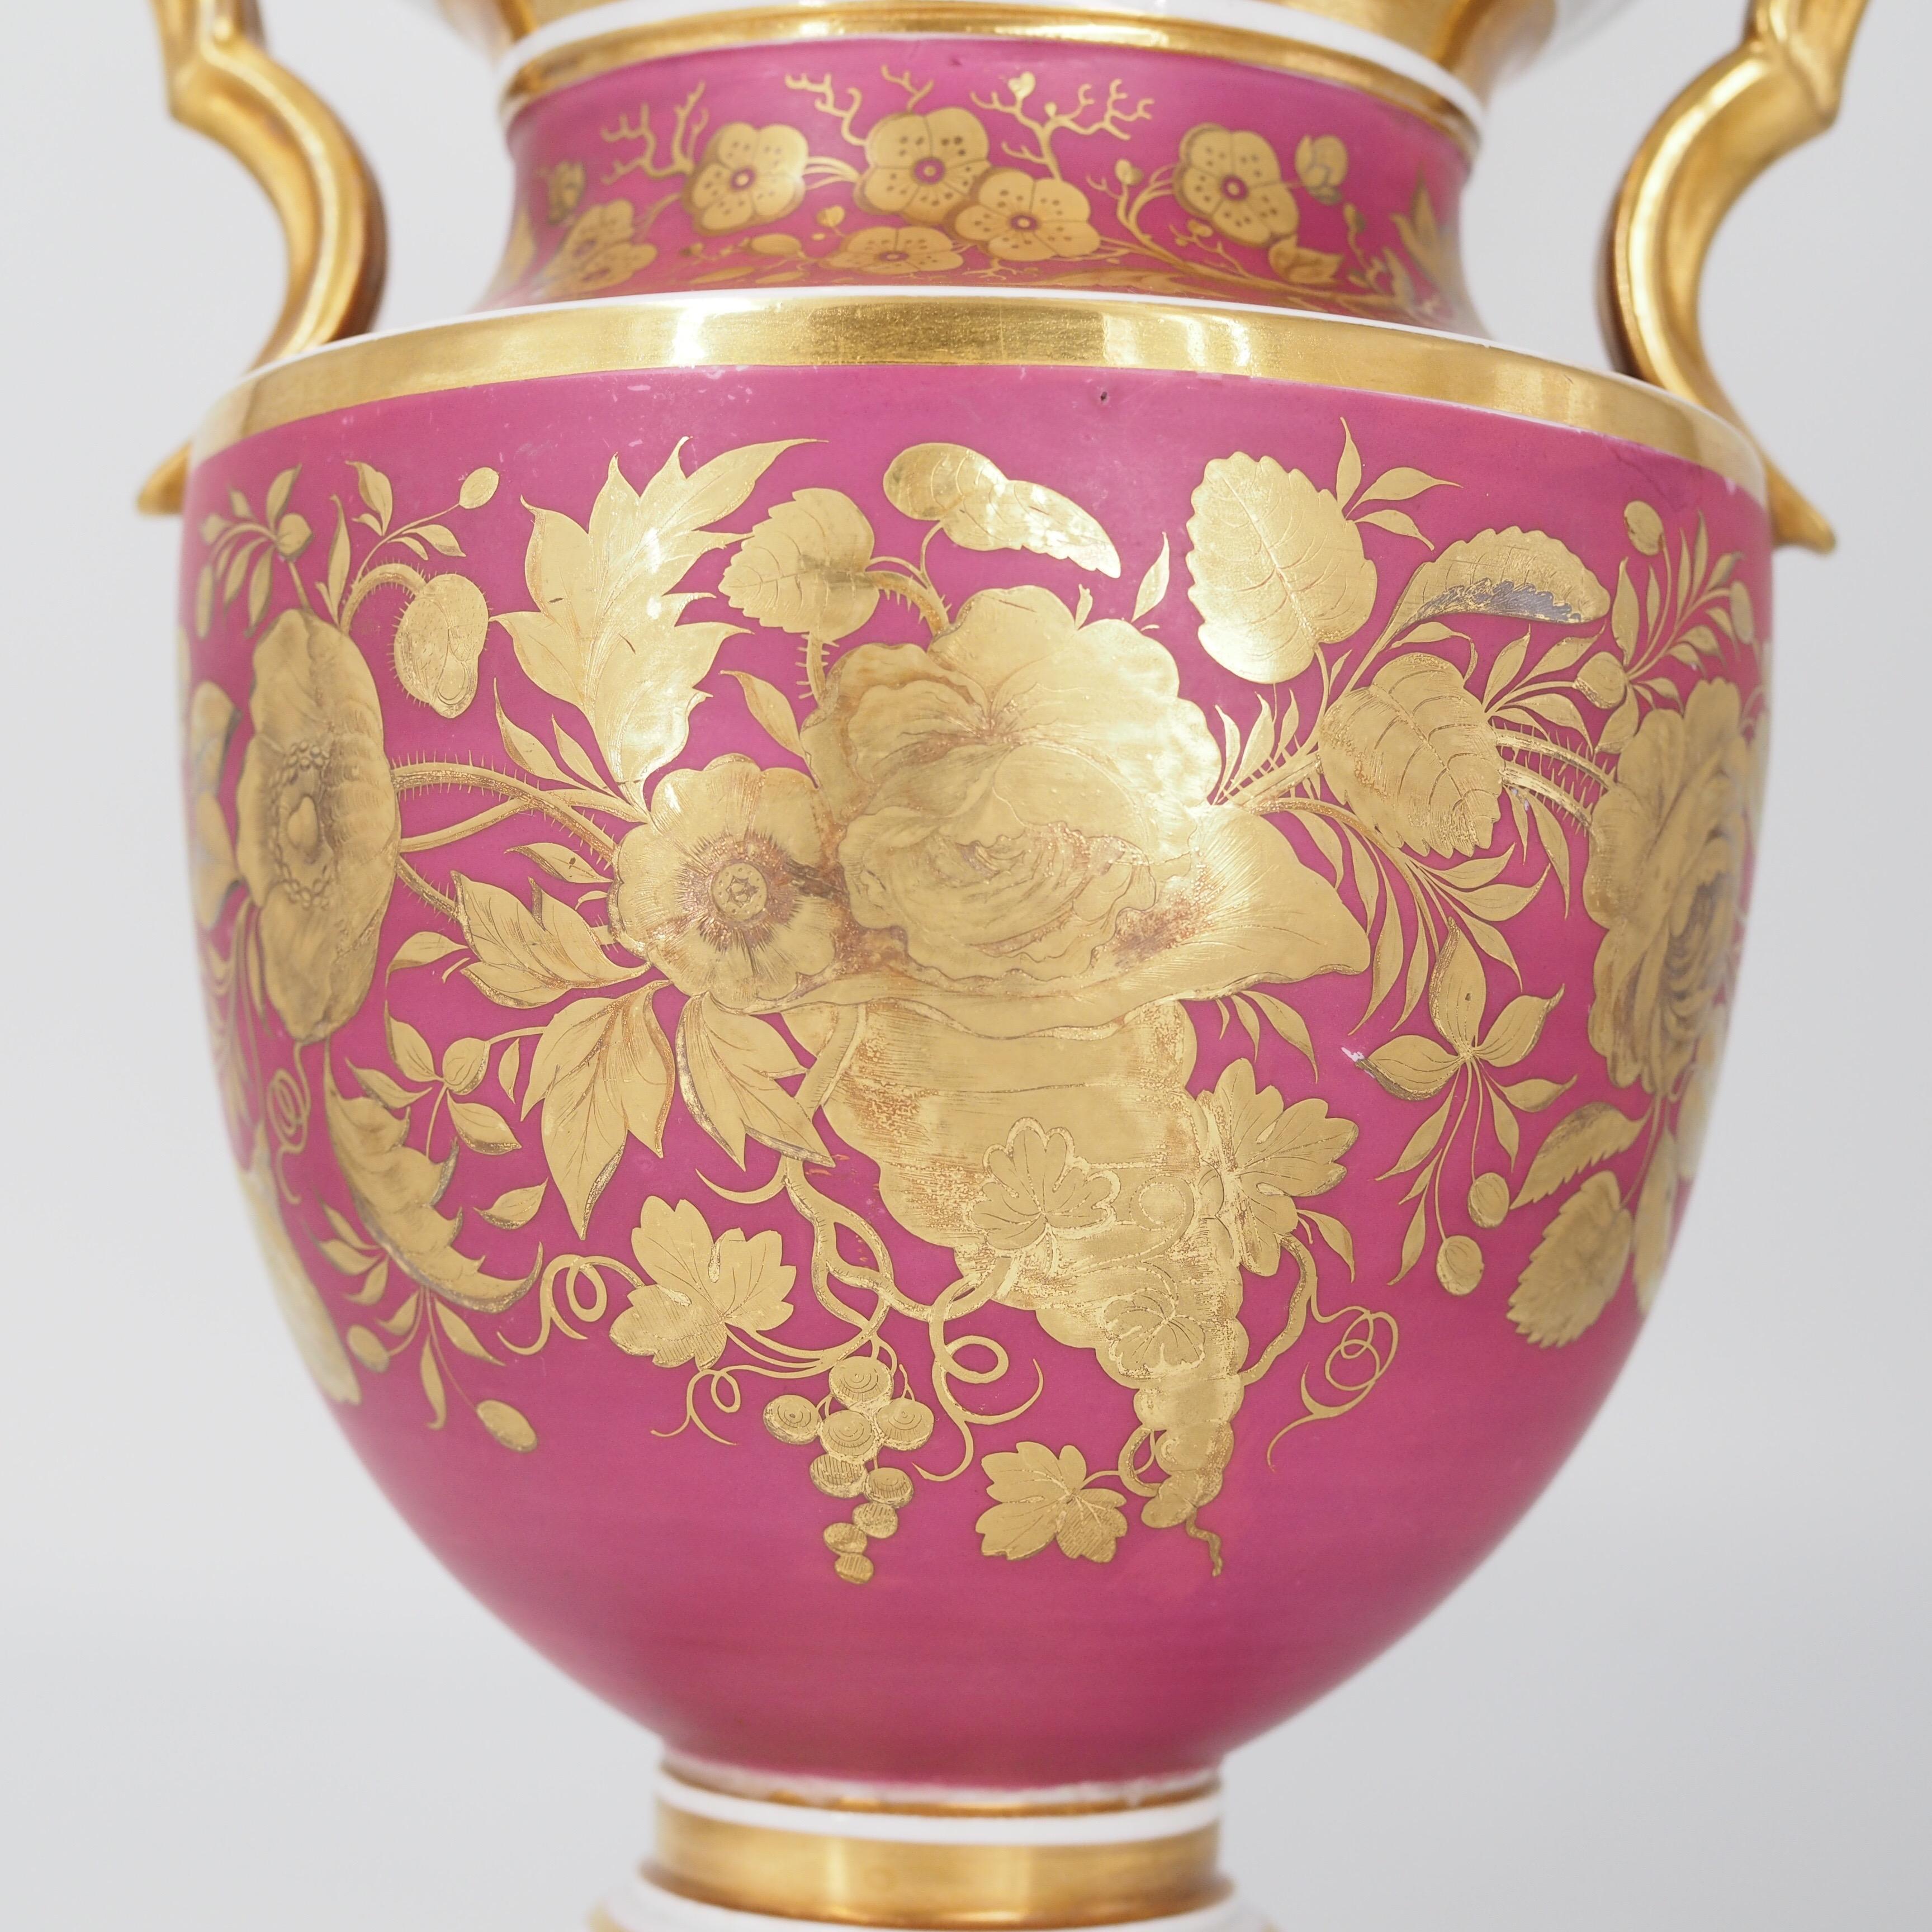 Neoclassical English Porcelain Classical Vase with Flower Panels, Claret Ground, c. 1825 For Sale